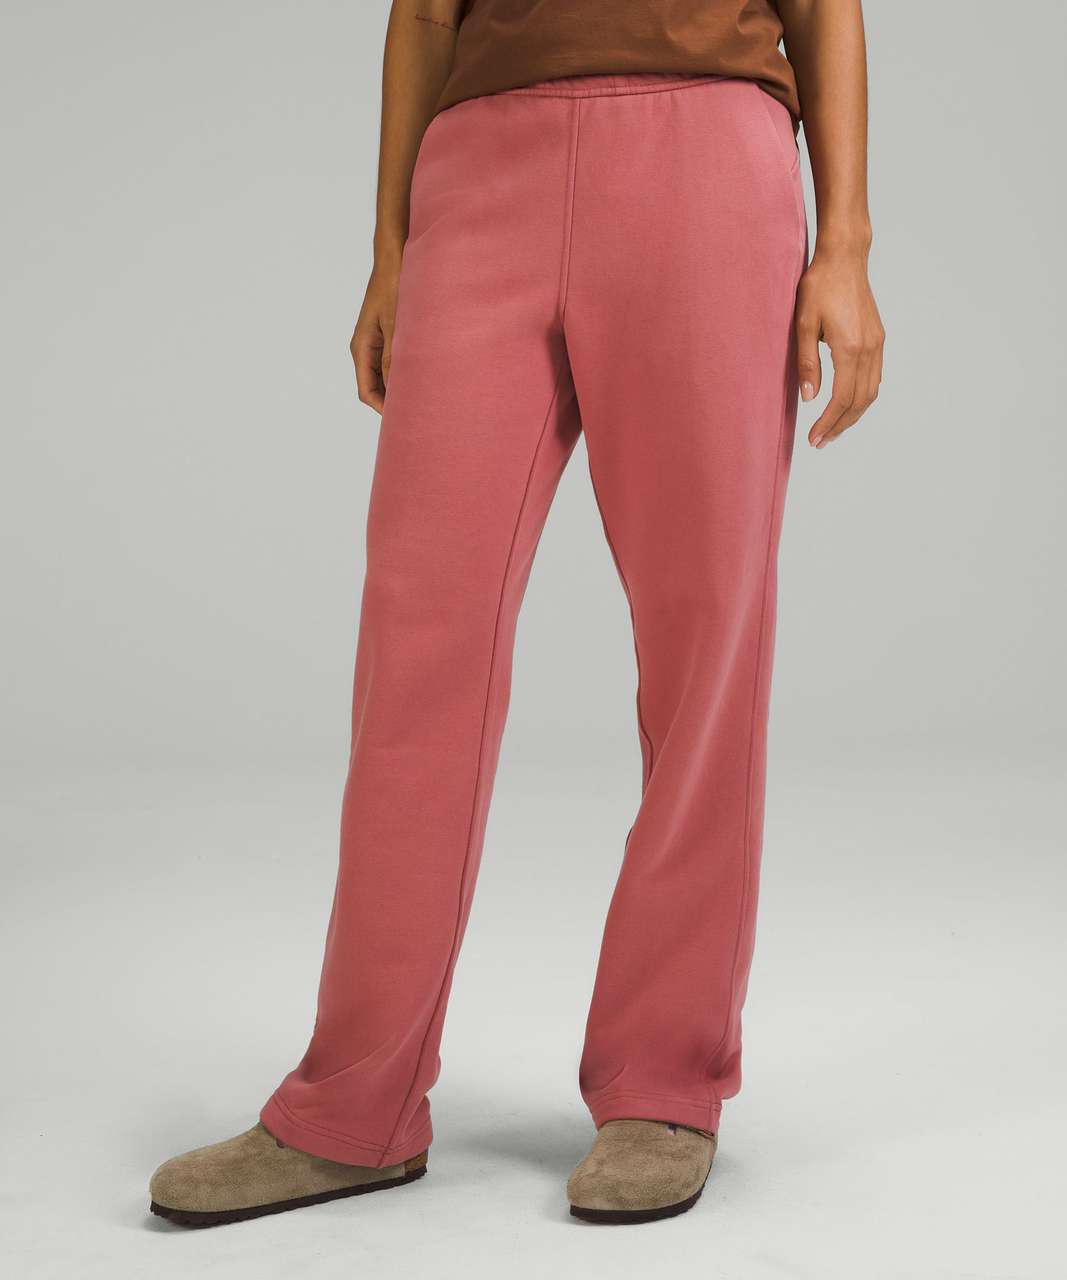 Loungeful Straight Leg Pant - Butternut Brown on markdown in my store $89!!  🇨🇦 : r/lululemon